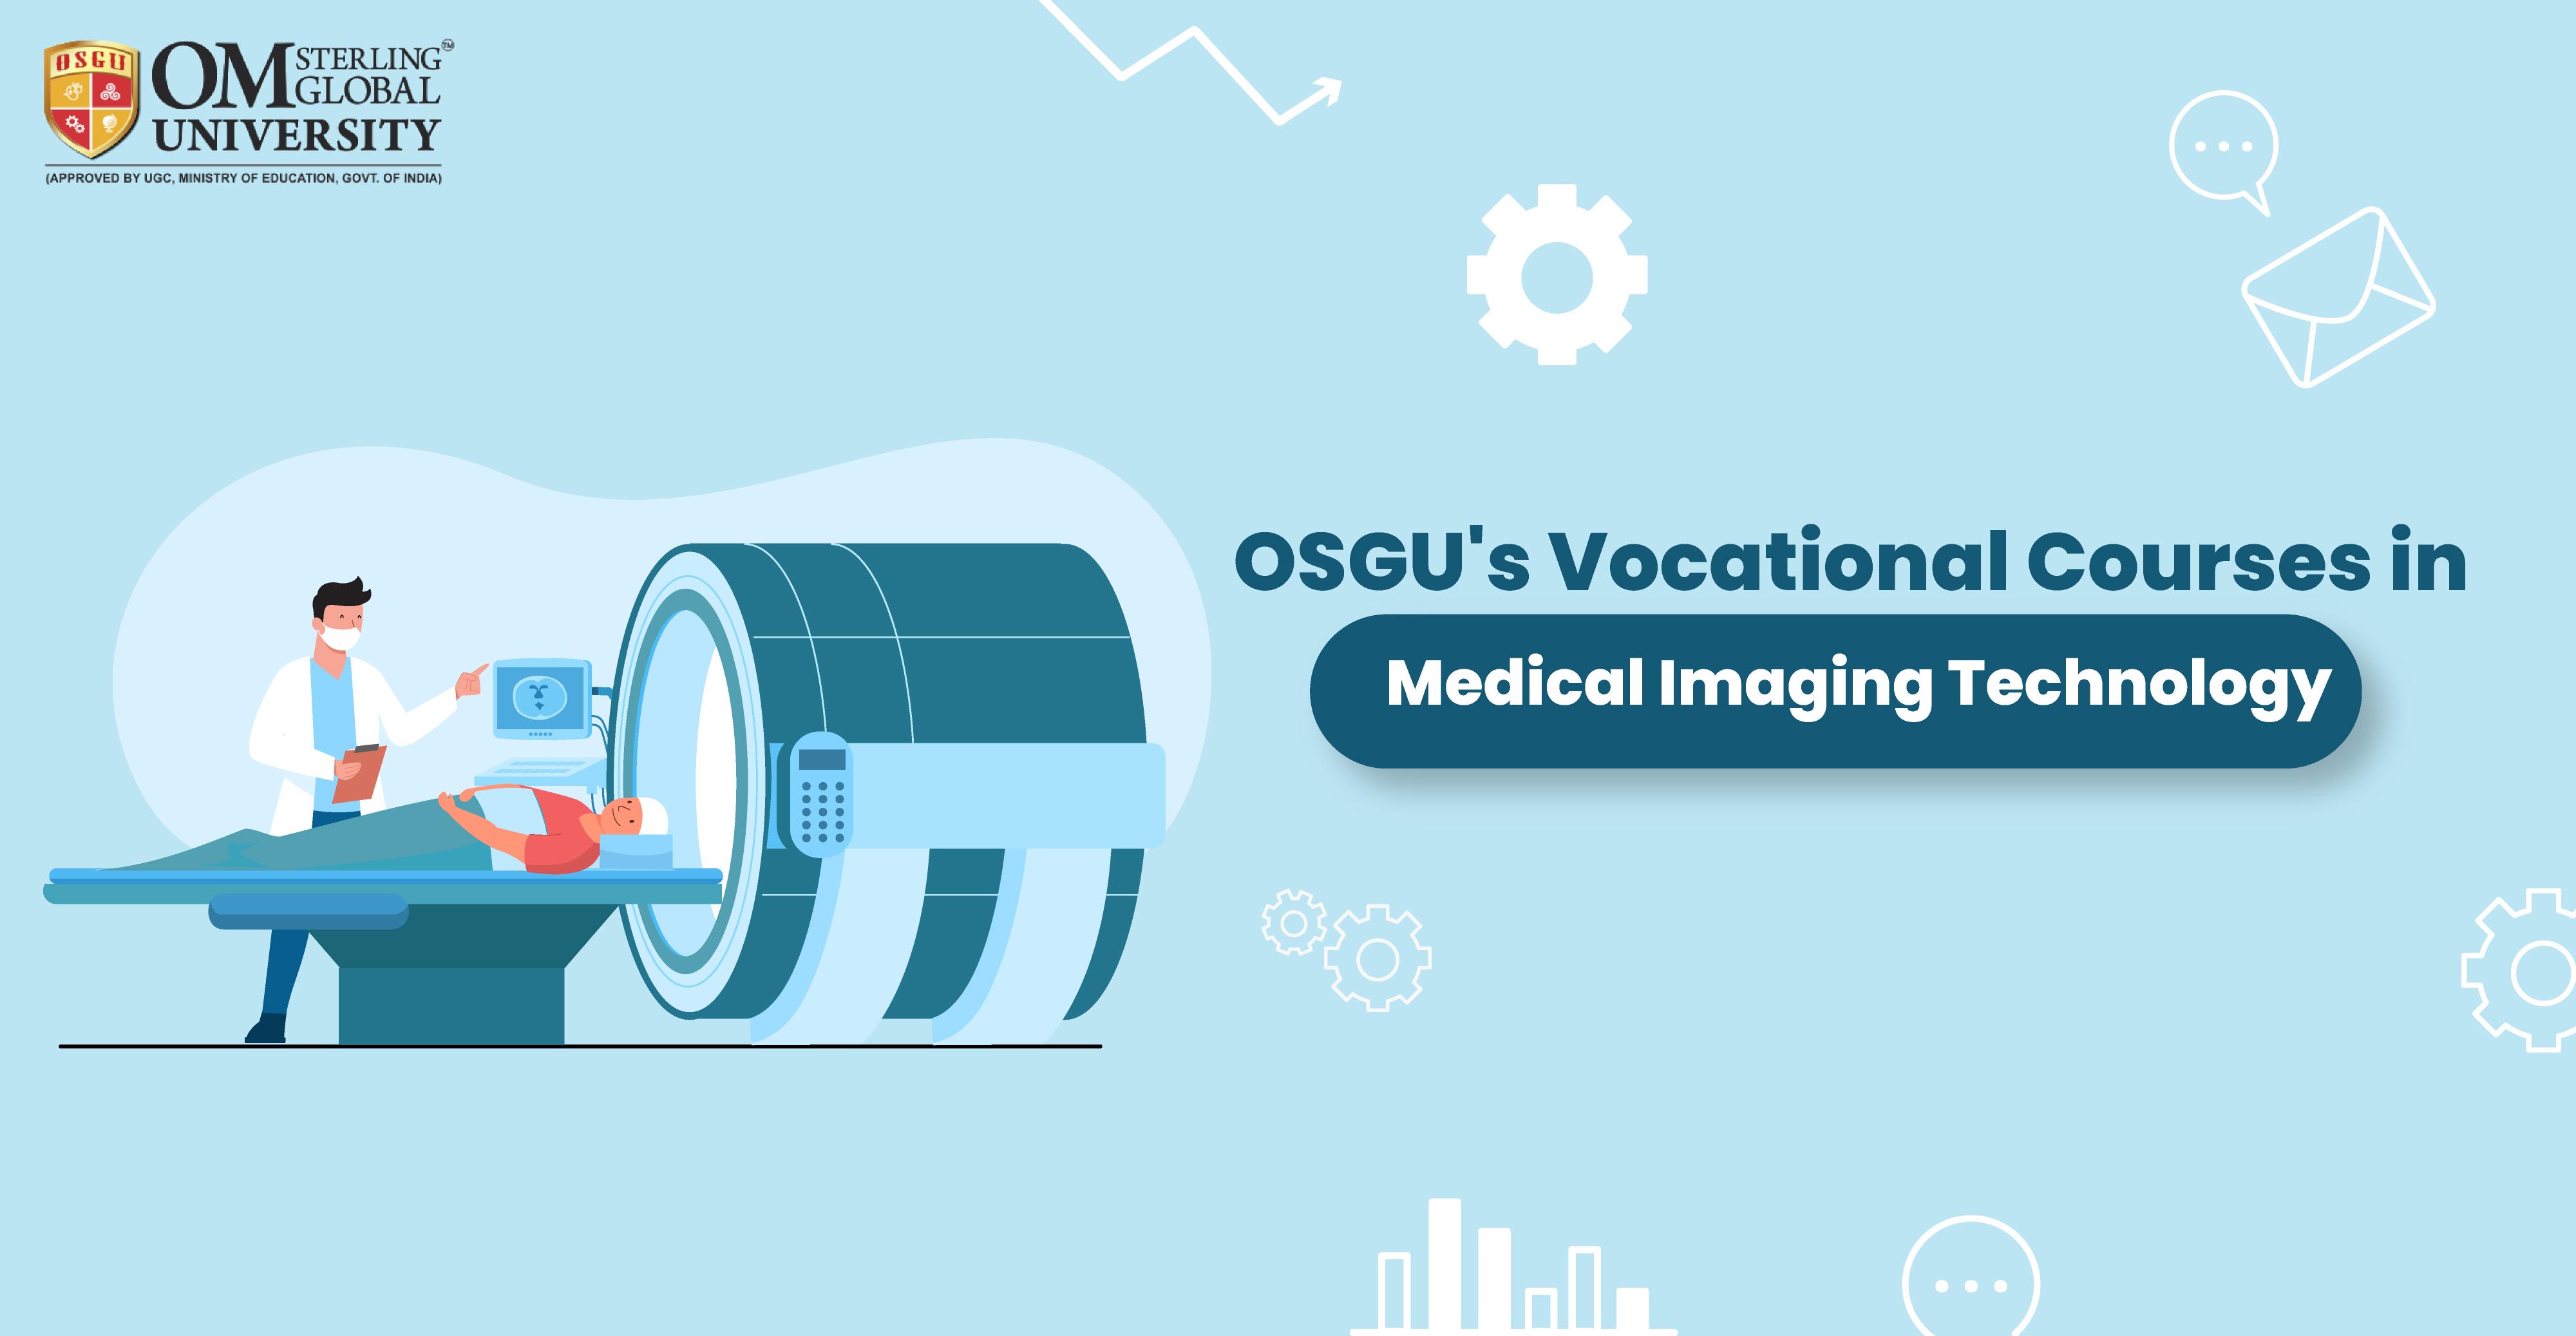 Vocational Courses in Medical Imaging Technology